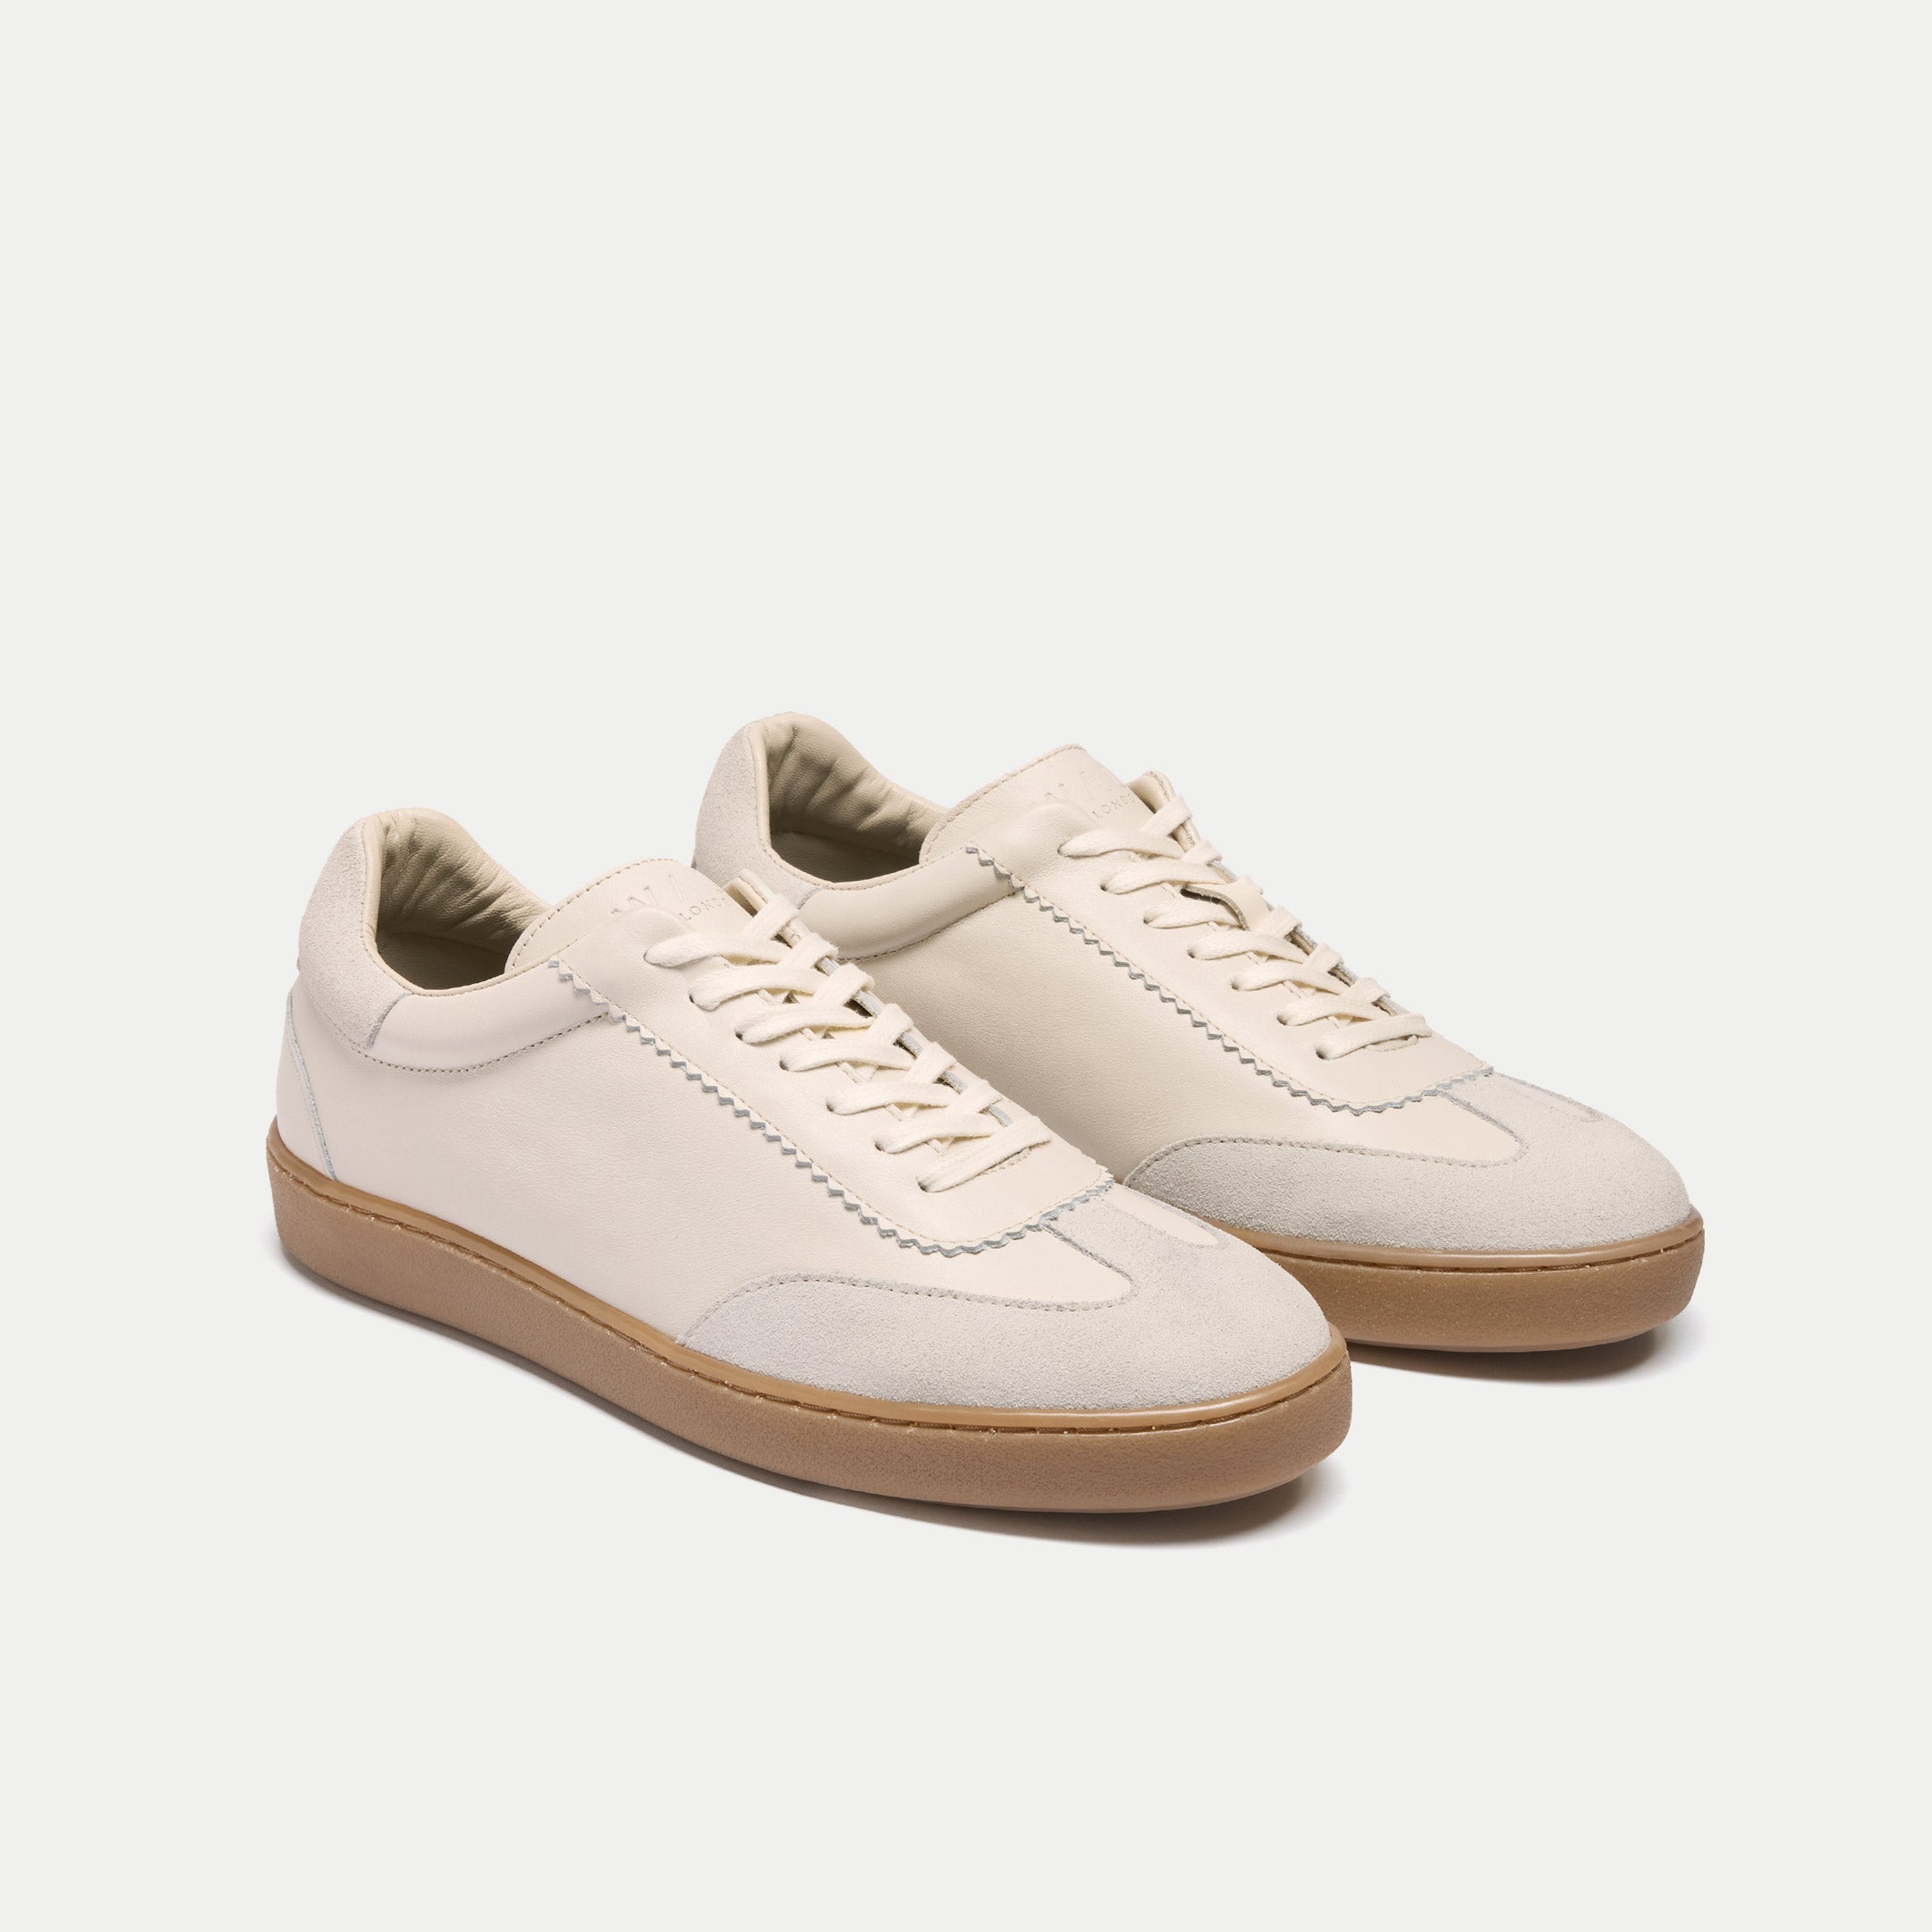 Mens Lisbon Trainer in Off White Leather | Walk London